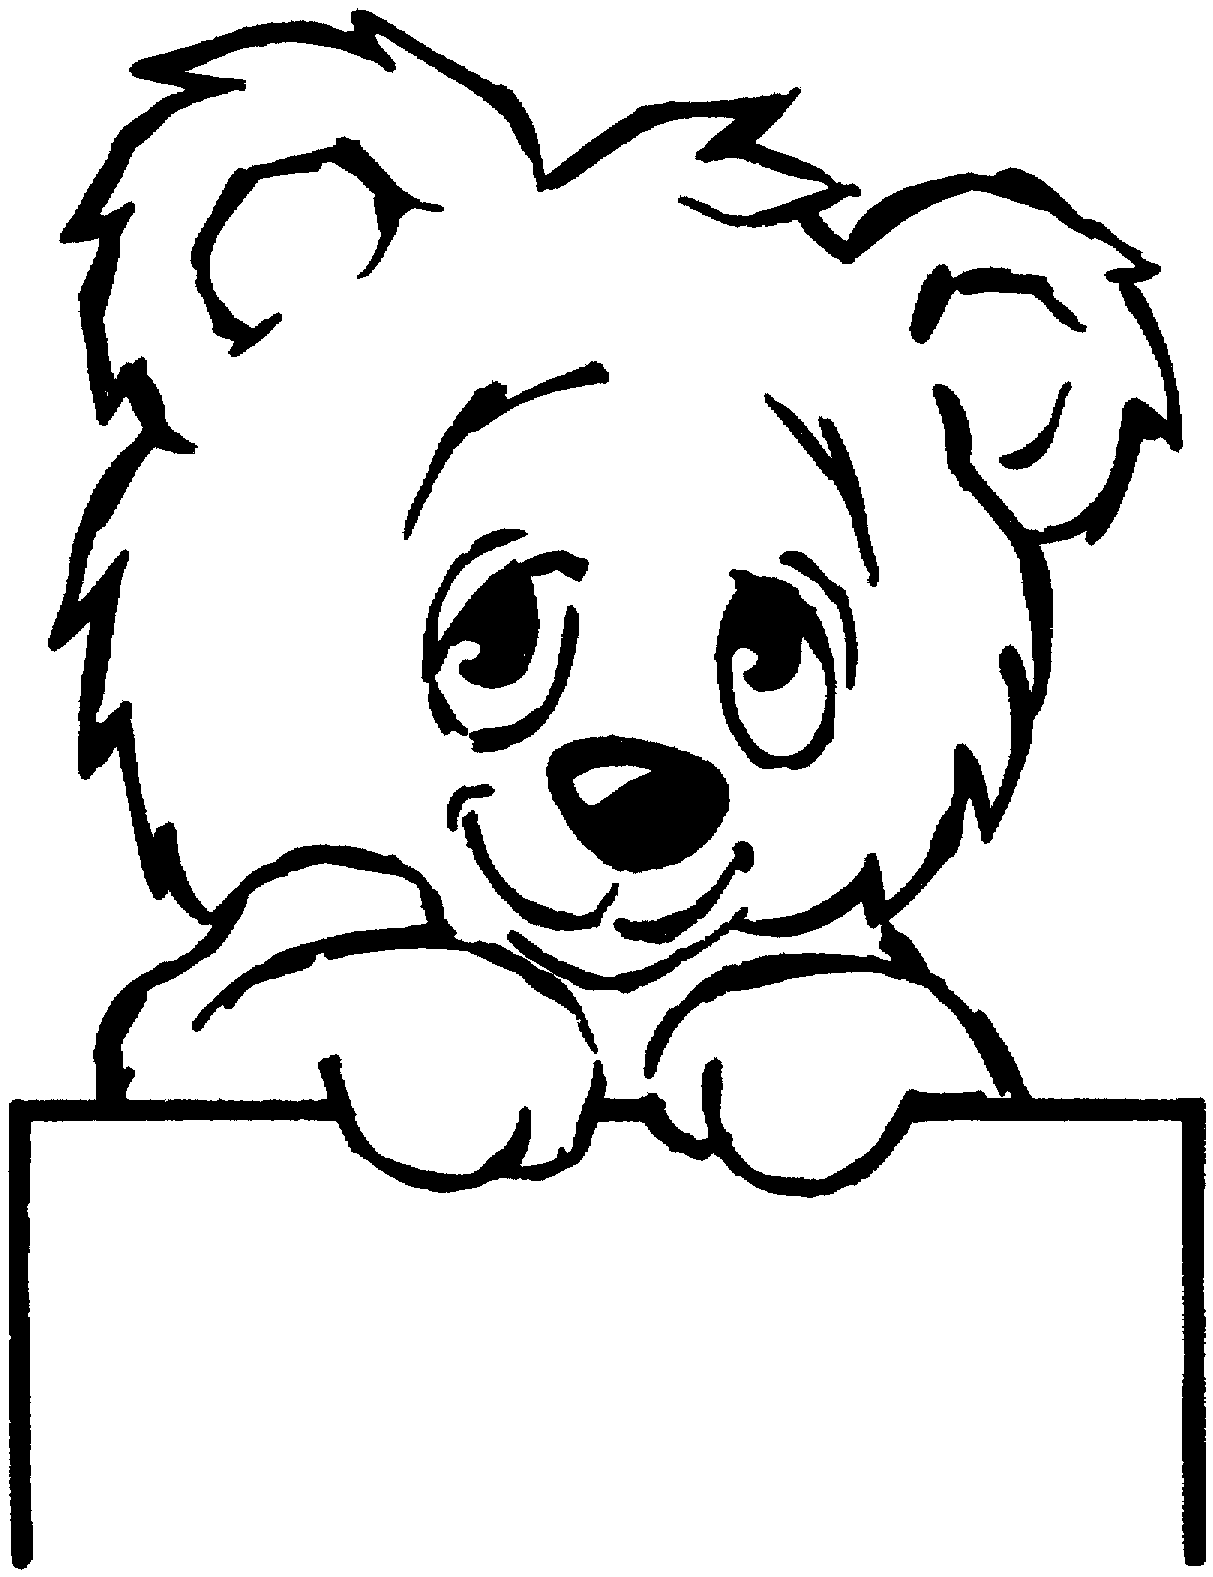 Cute teddy bear coloring pages - Coloring Pages & Pictures - IMAGIXS